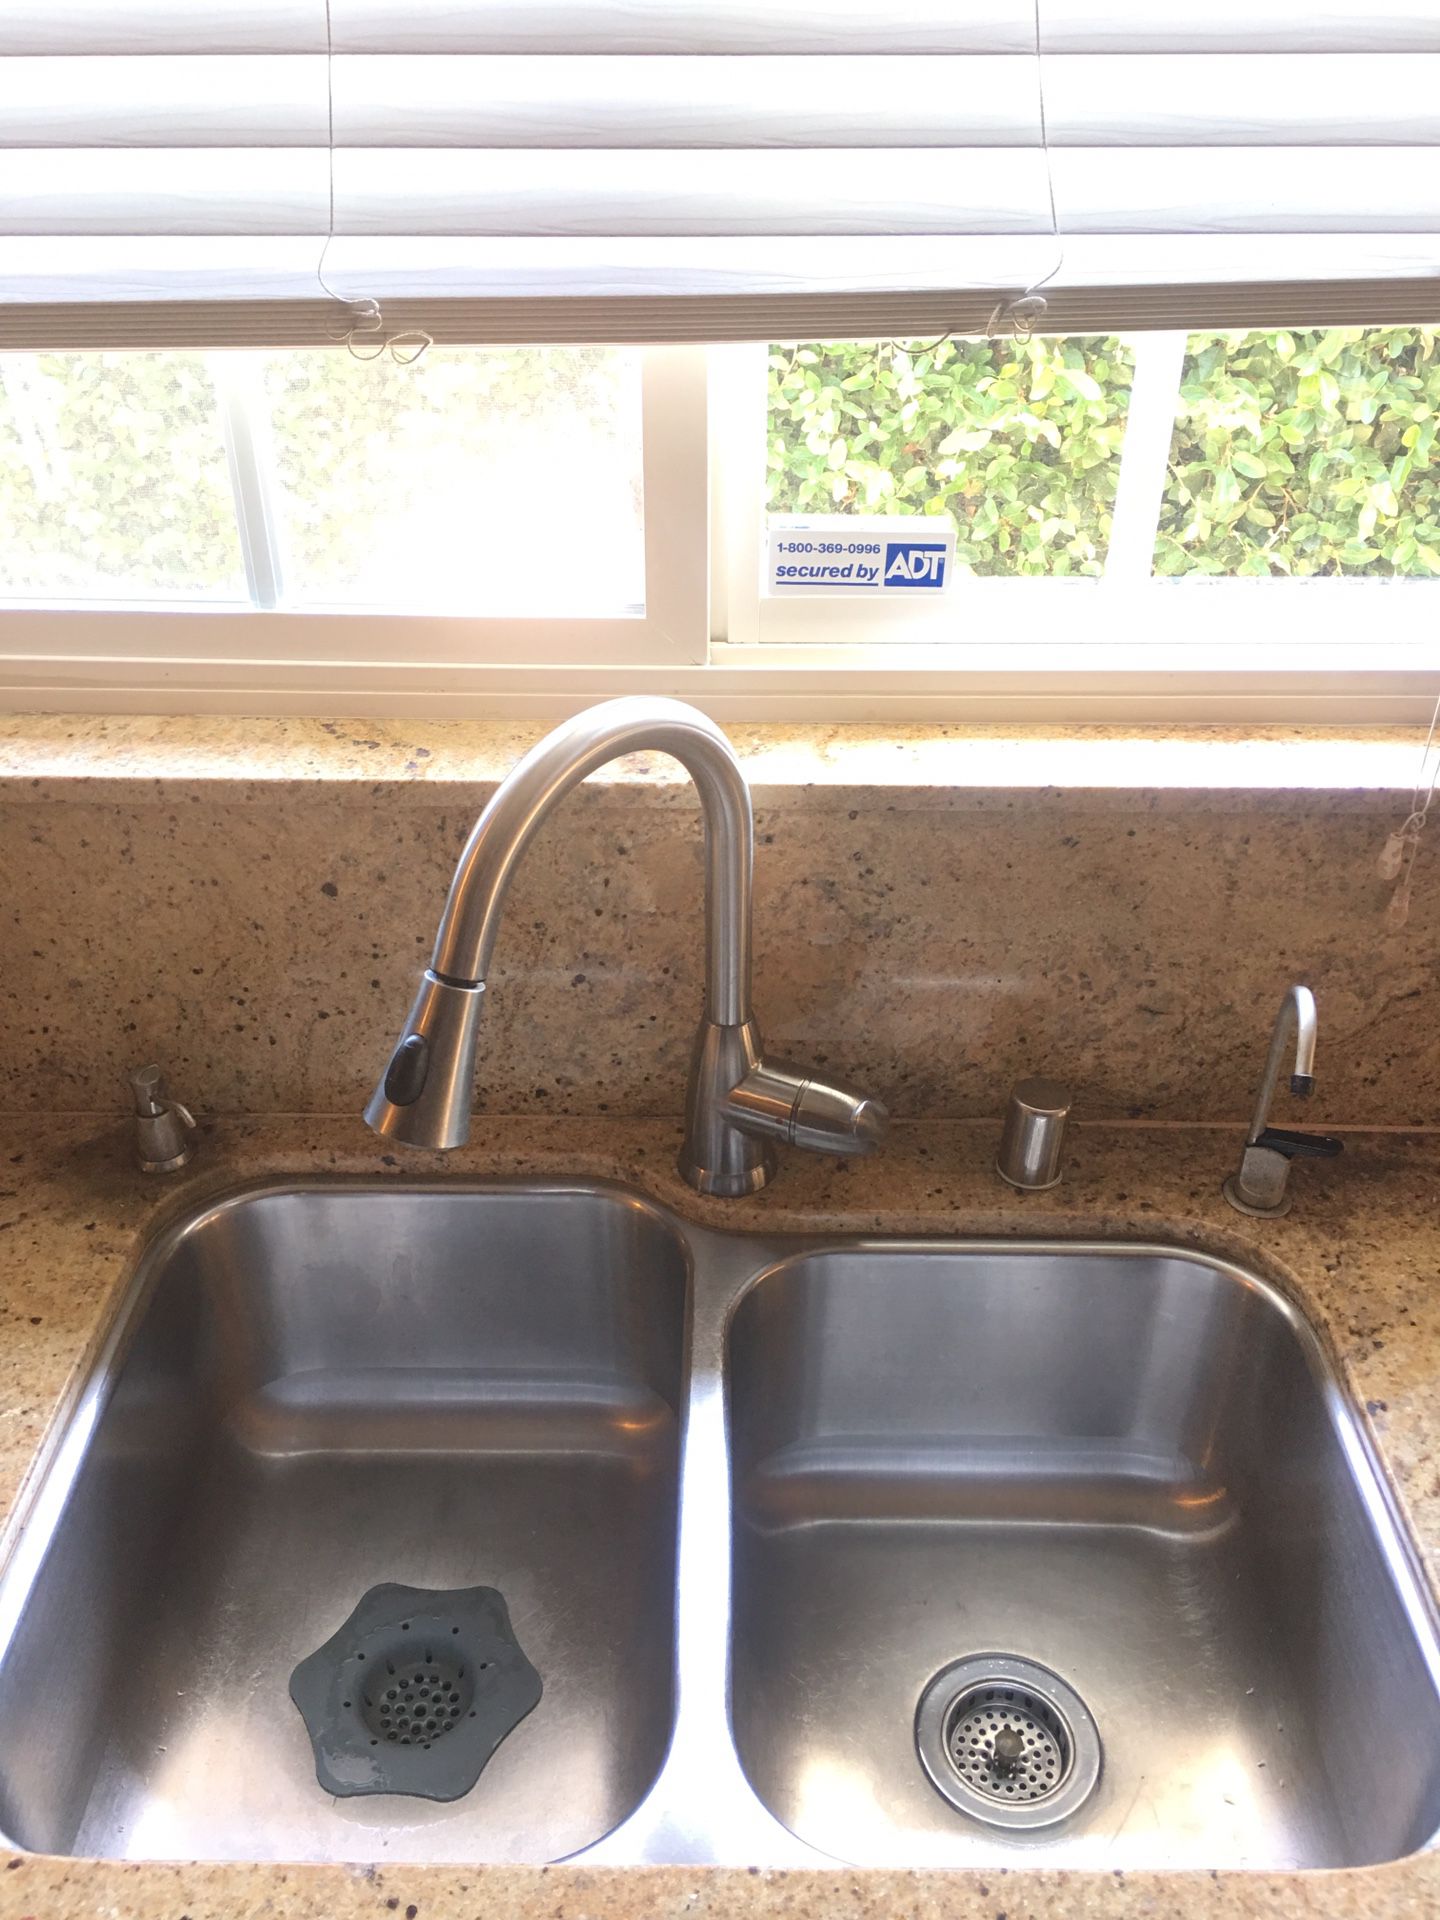 Stainless steal kitchen sink and faucet